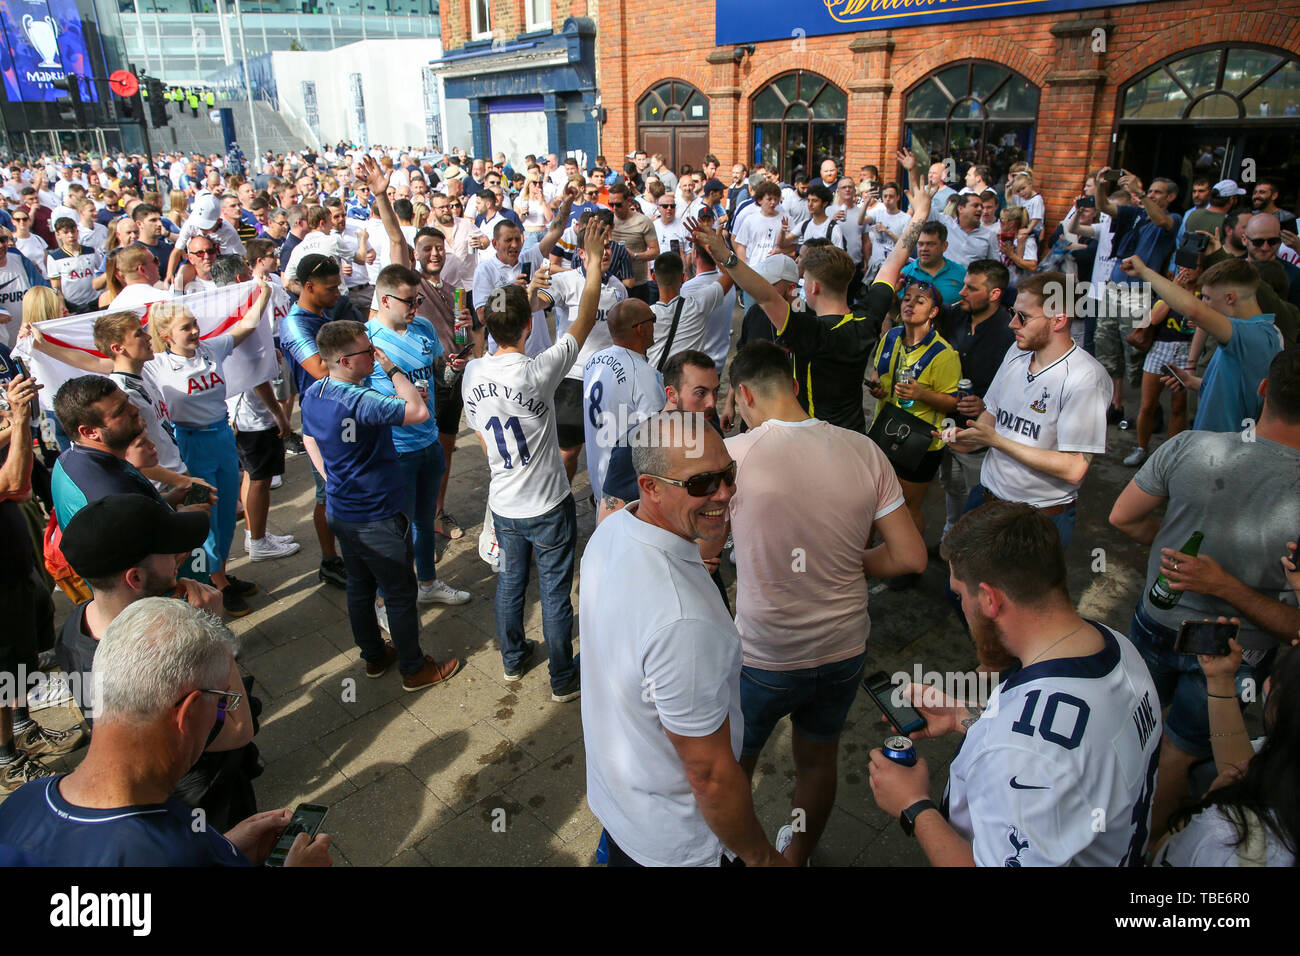 whitehart-lane-stadium-north-london-uk-1-june-2019-thousands-of-tottenham-hotspur-fans-arrive-at-the-clubs-whitehart-lane-stadium-in-tottenham-in-north-london-to-watch-live-screenings-of-the-champions-league-final-between-tottenham-and-liverpool-this-evening-in-madrid-credit-dinendra-hariaalamy-live-news-TBE6R0.jpg